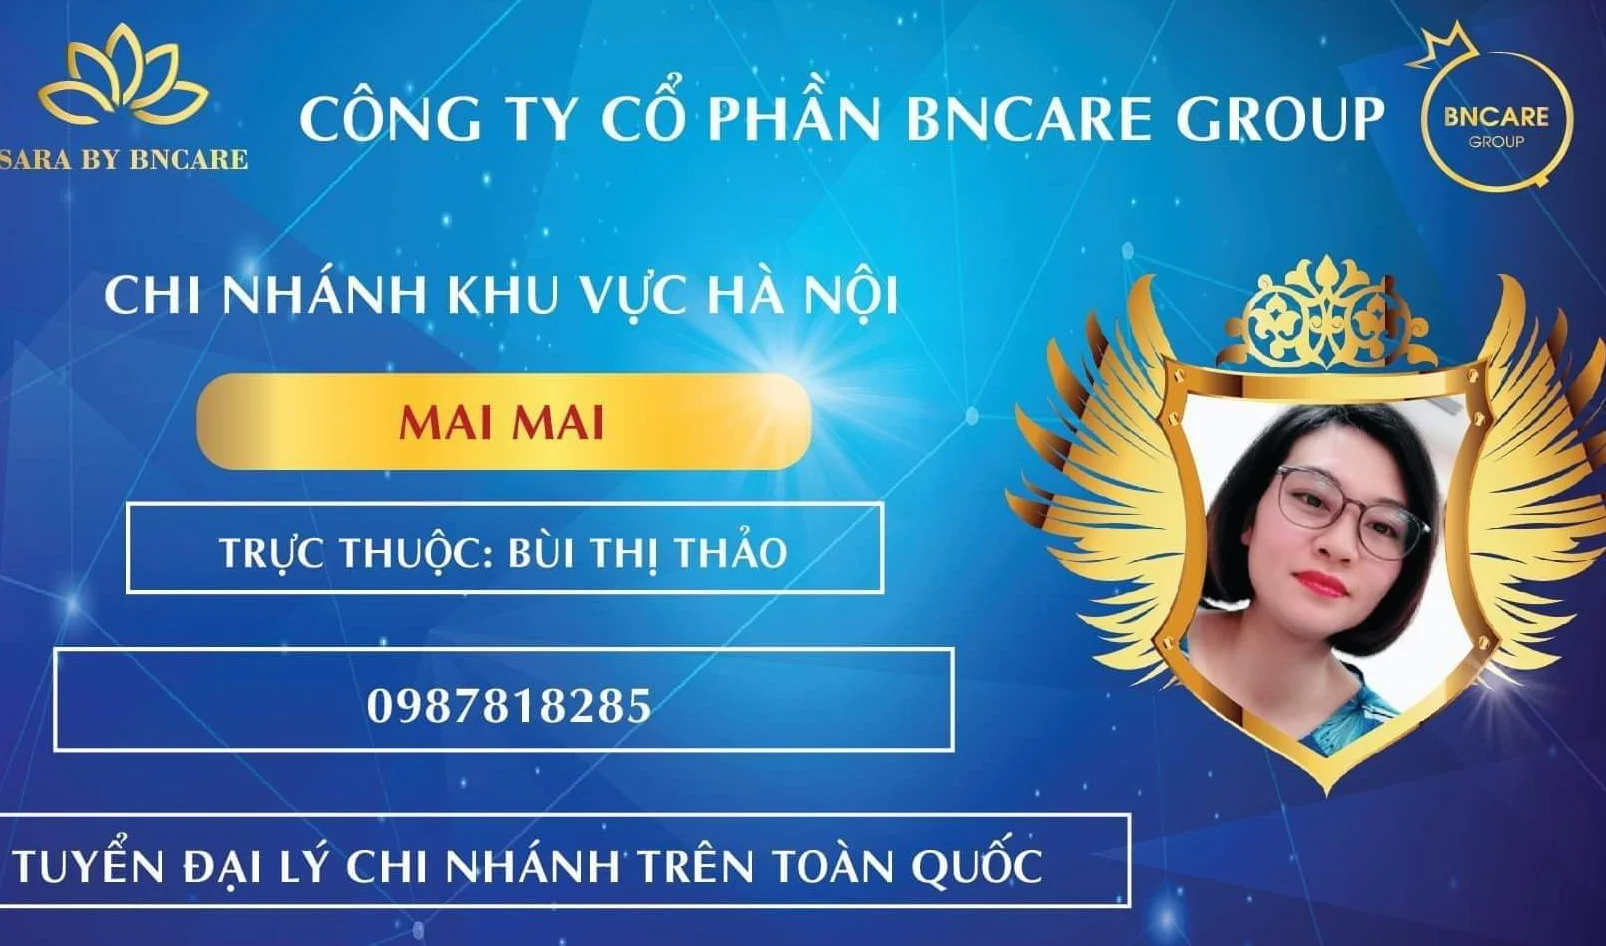 Mai Nguyễn's cover photo